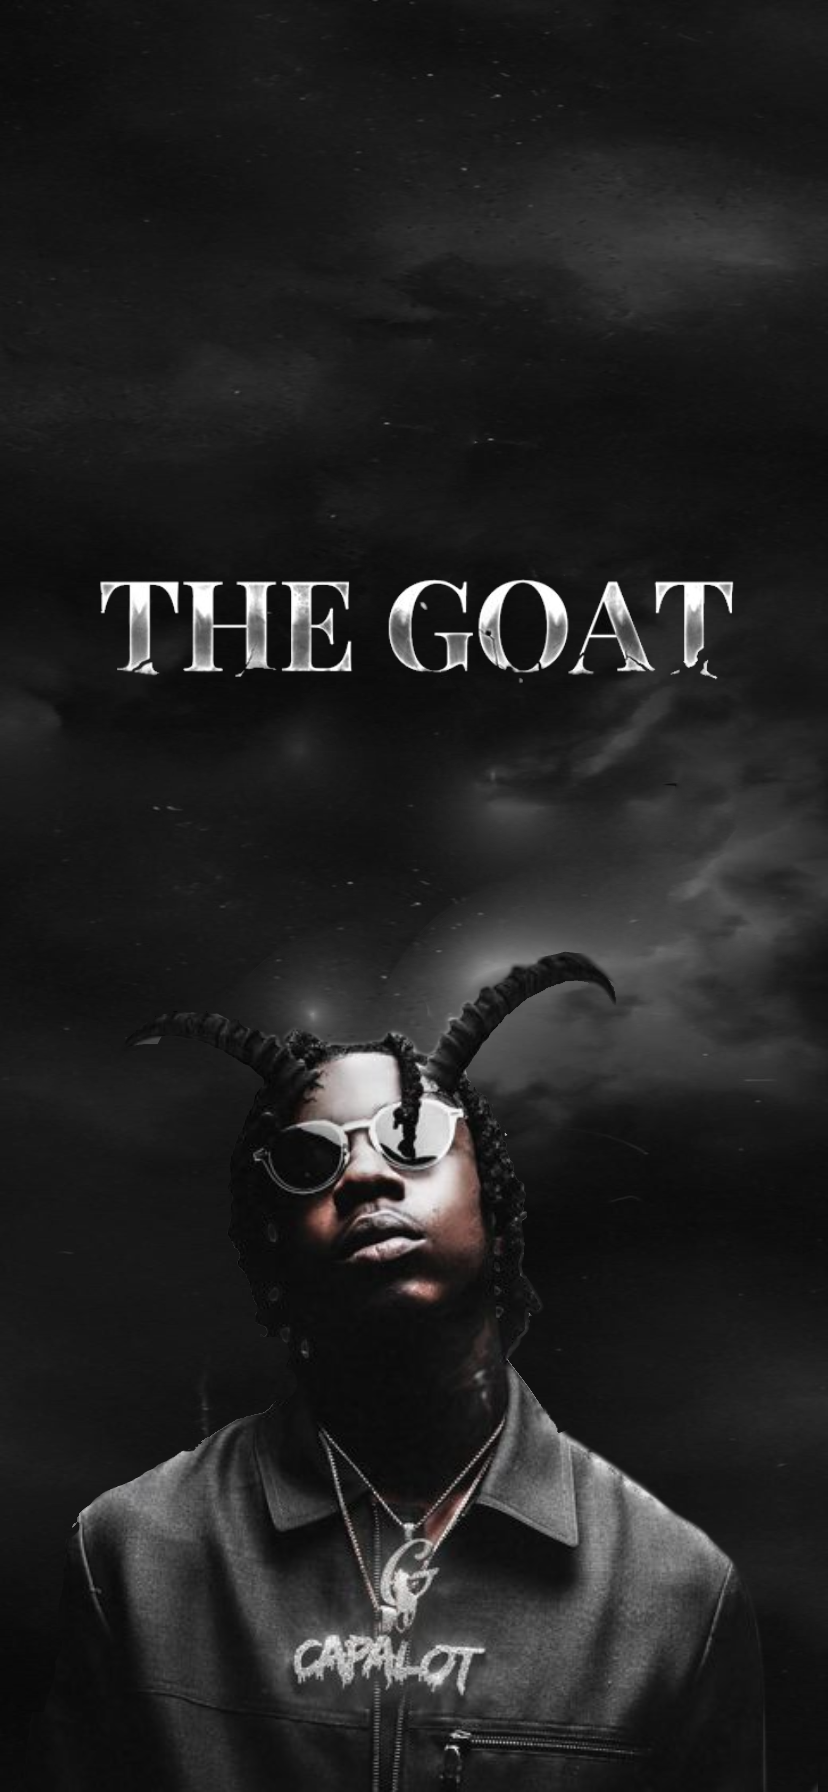 Someone wanted me to make a Polo G THE GOAT wallpaper, so here you go. Made for iPhone XR: PoloG